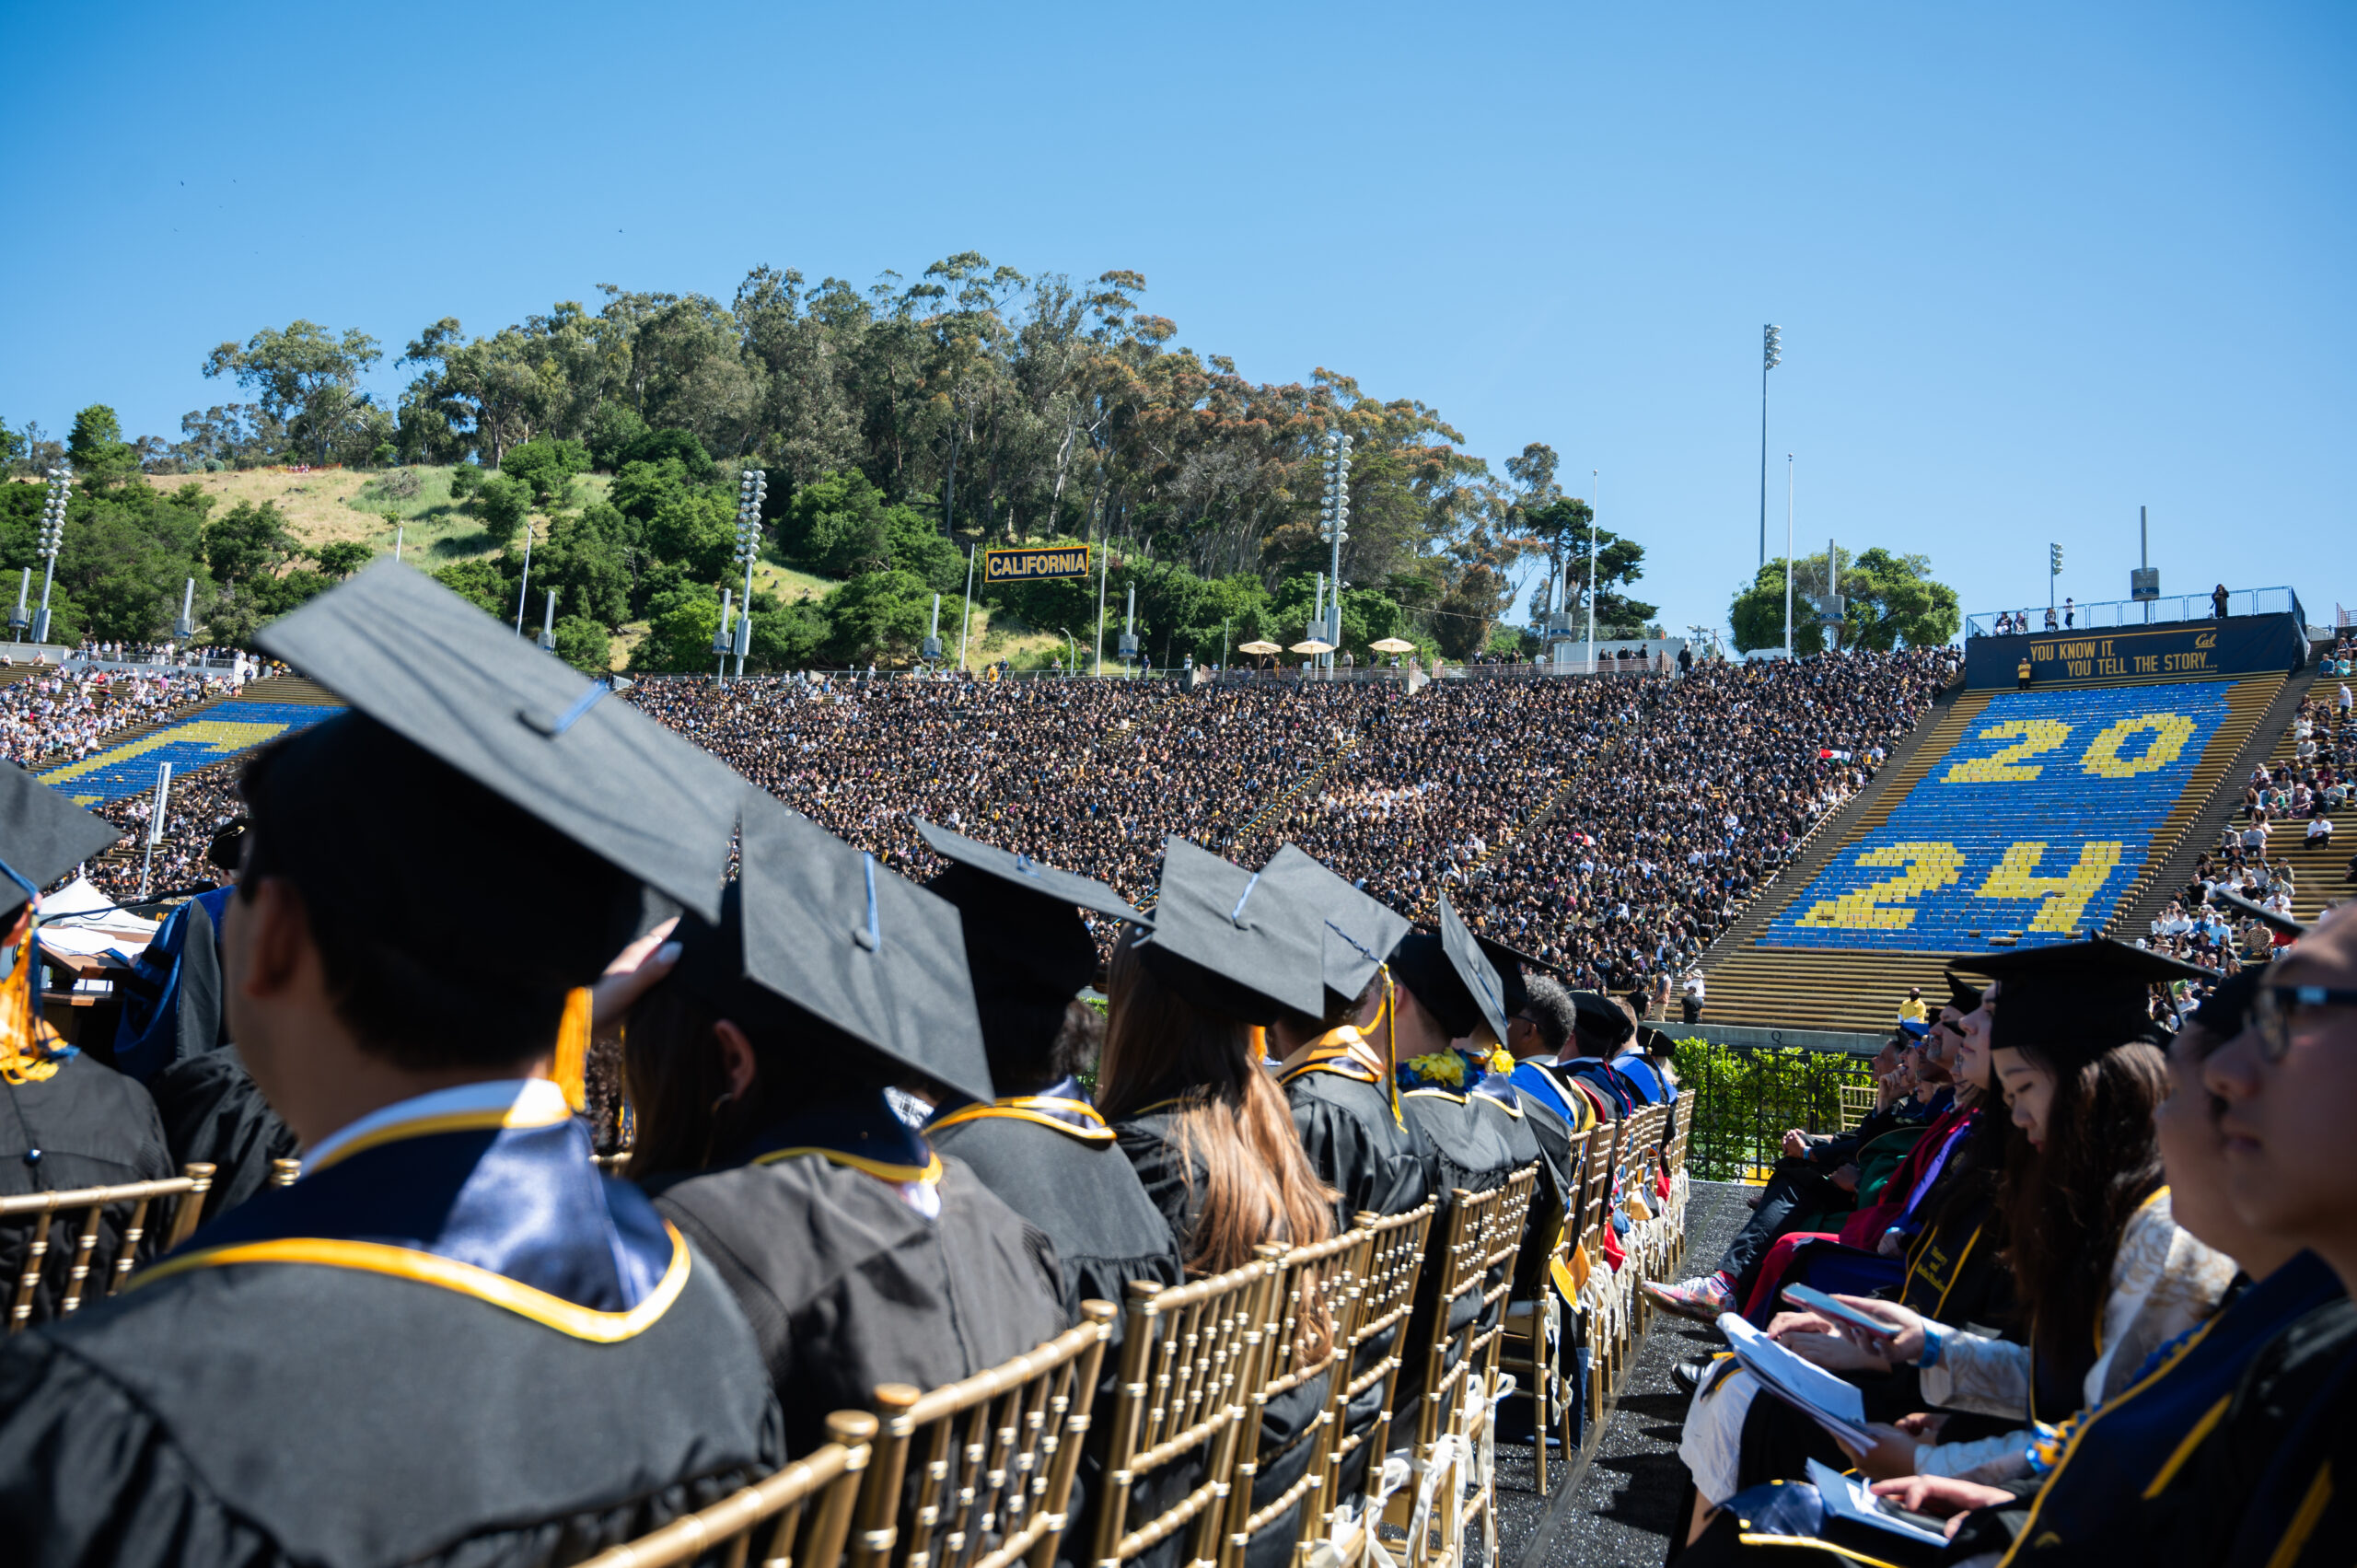 Students wearing graduation regalia sit, listening to speakers at UC Berkeley's spring commencement